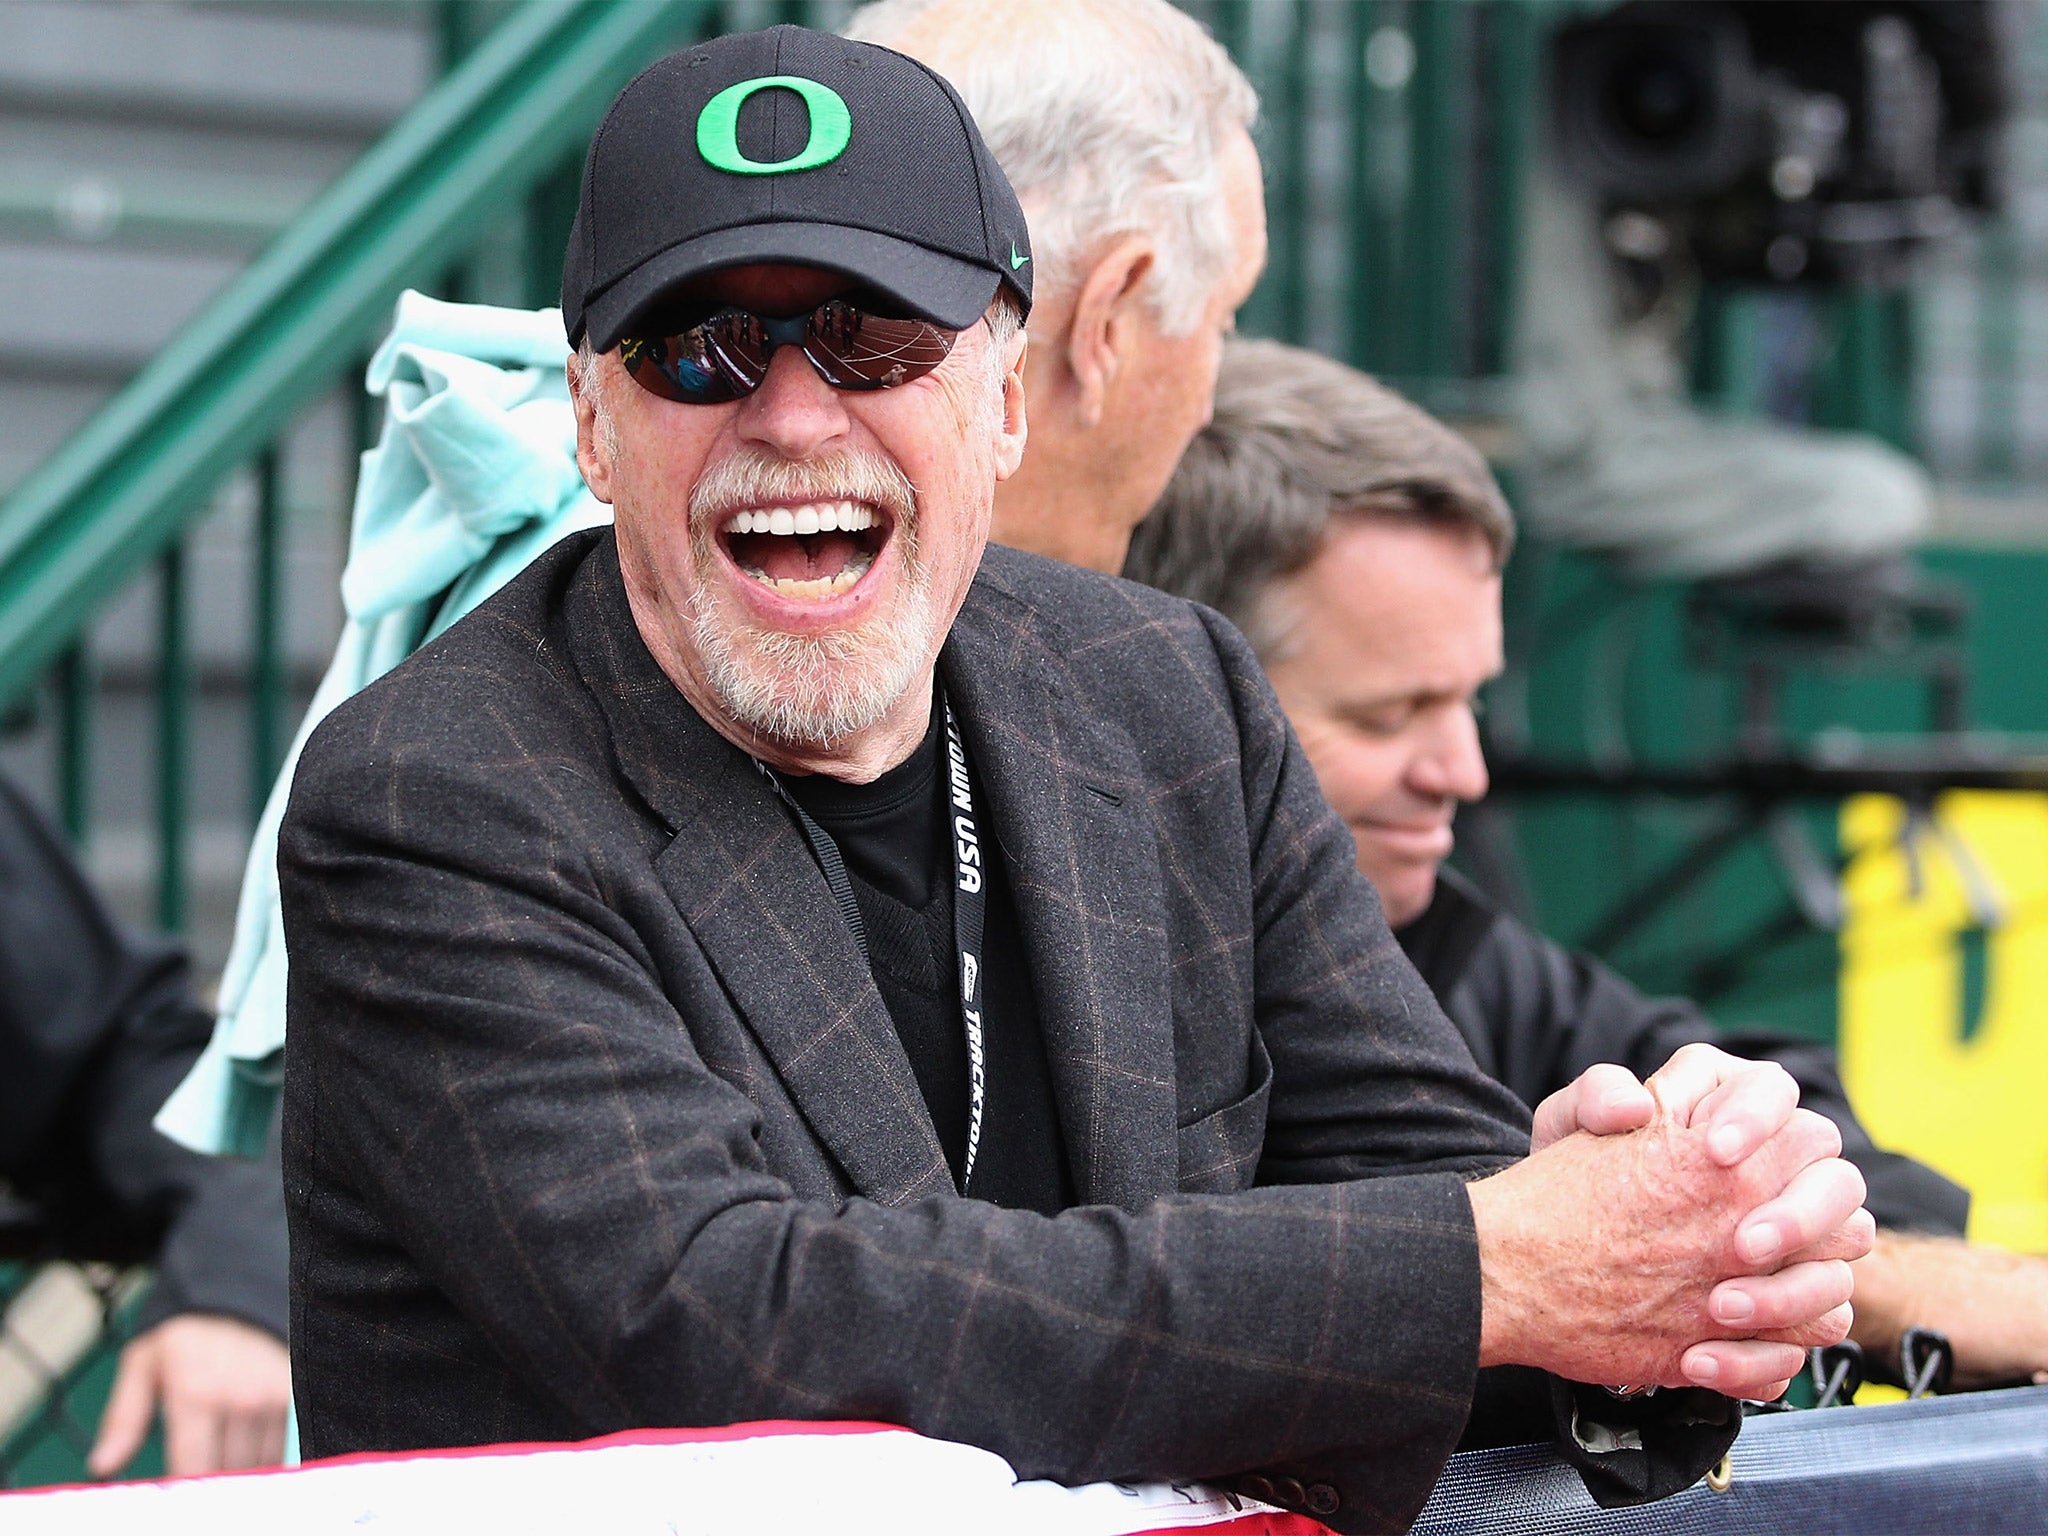 Phil Knight, co-founder and chairman of Nike, owns a stake in the company worth $22.3bn